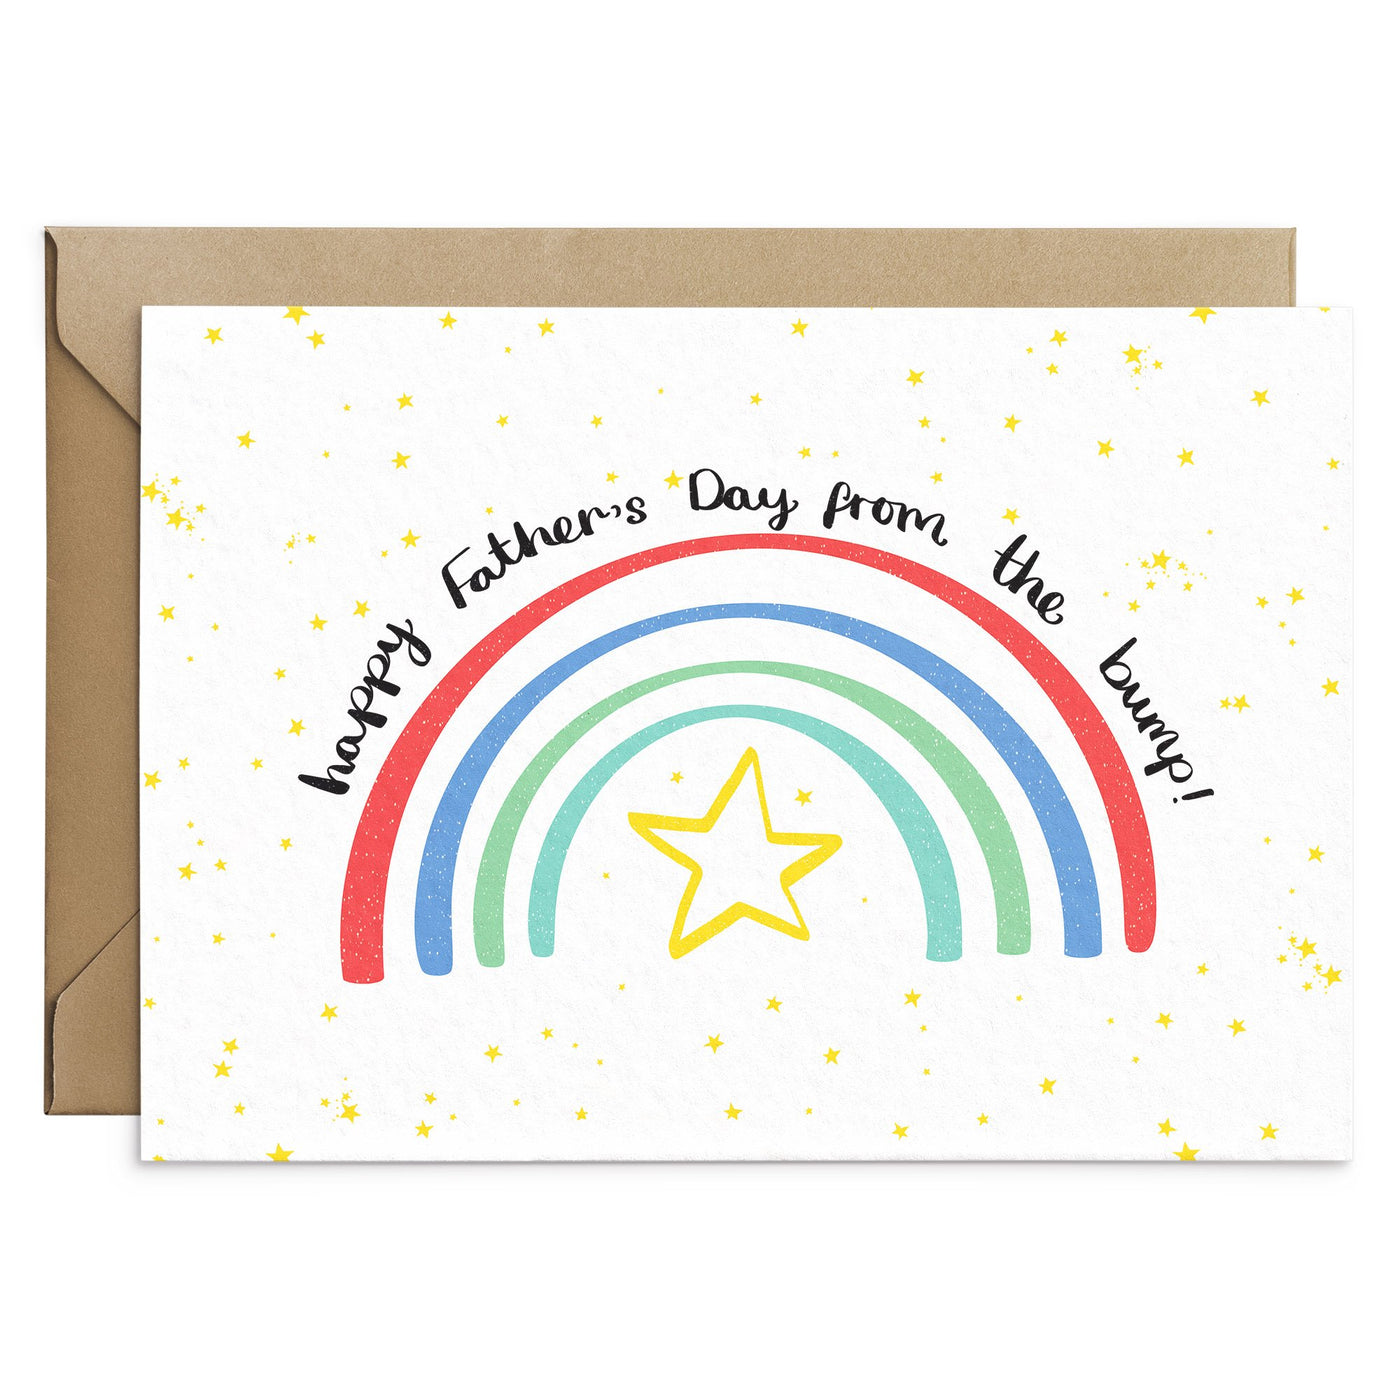 From The Bump - Fathers Day Cards - Poppins & Co.